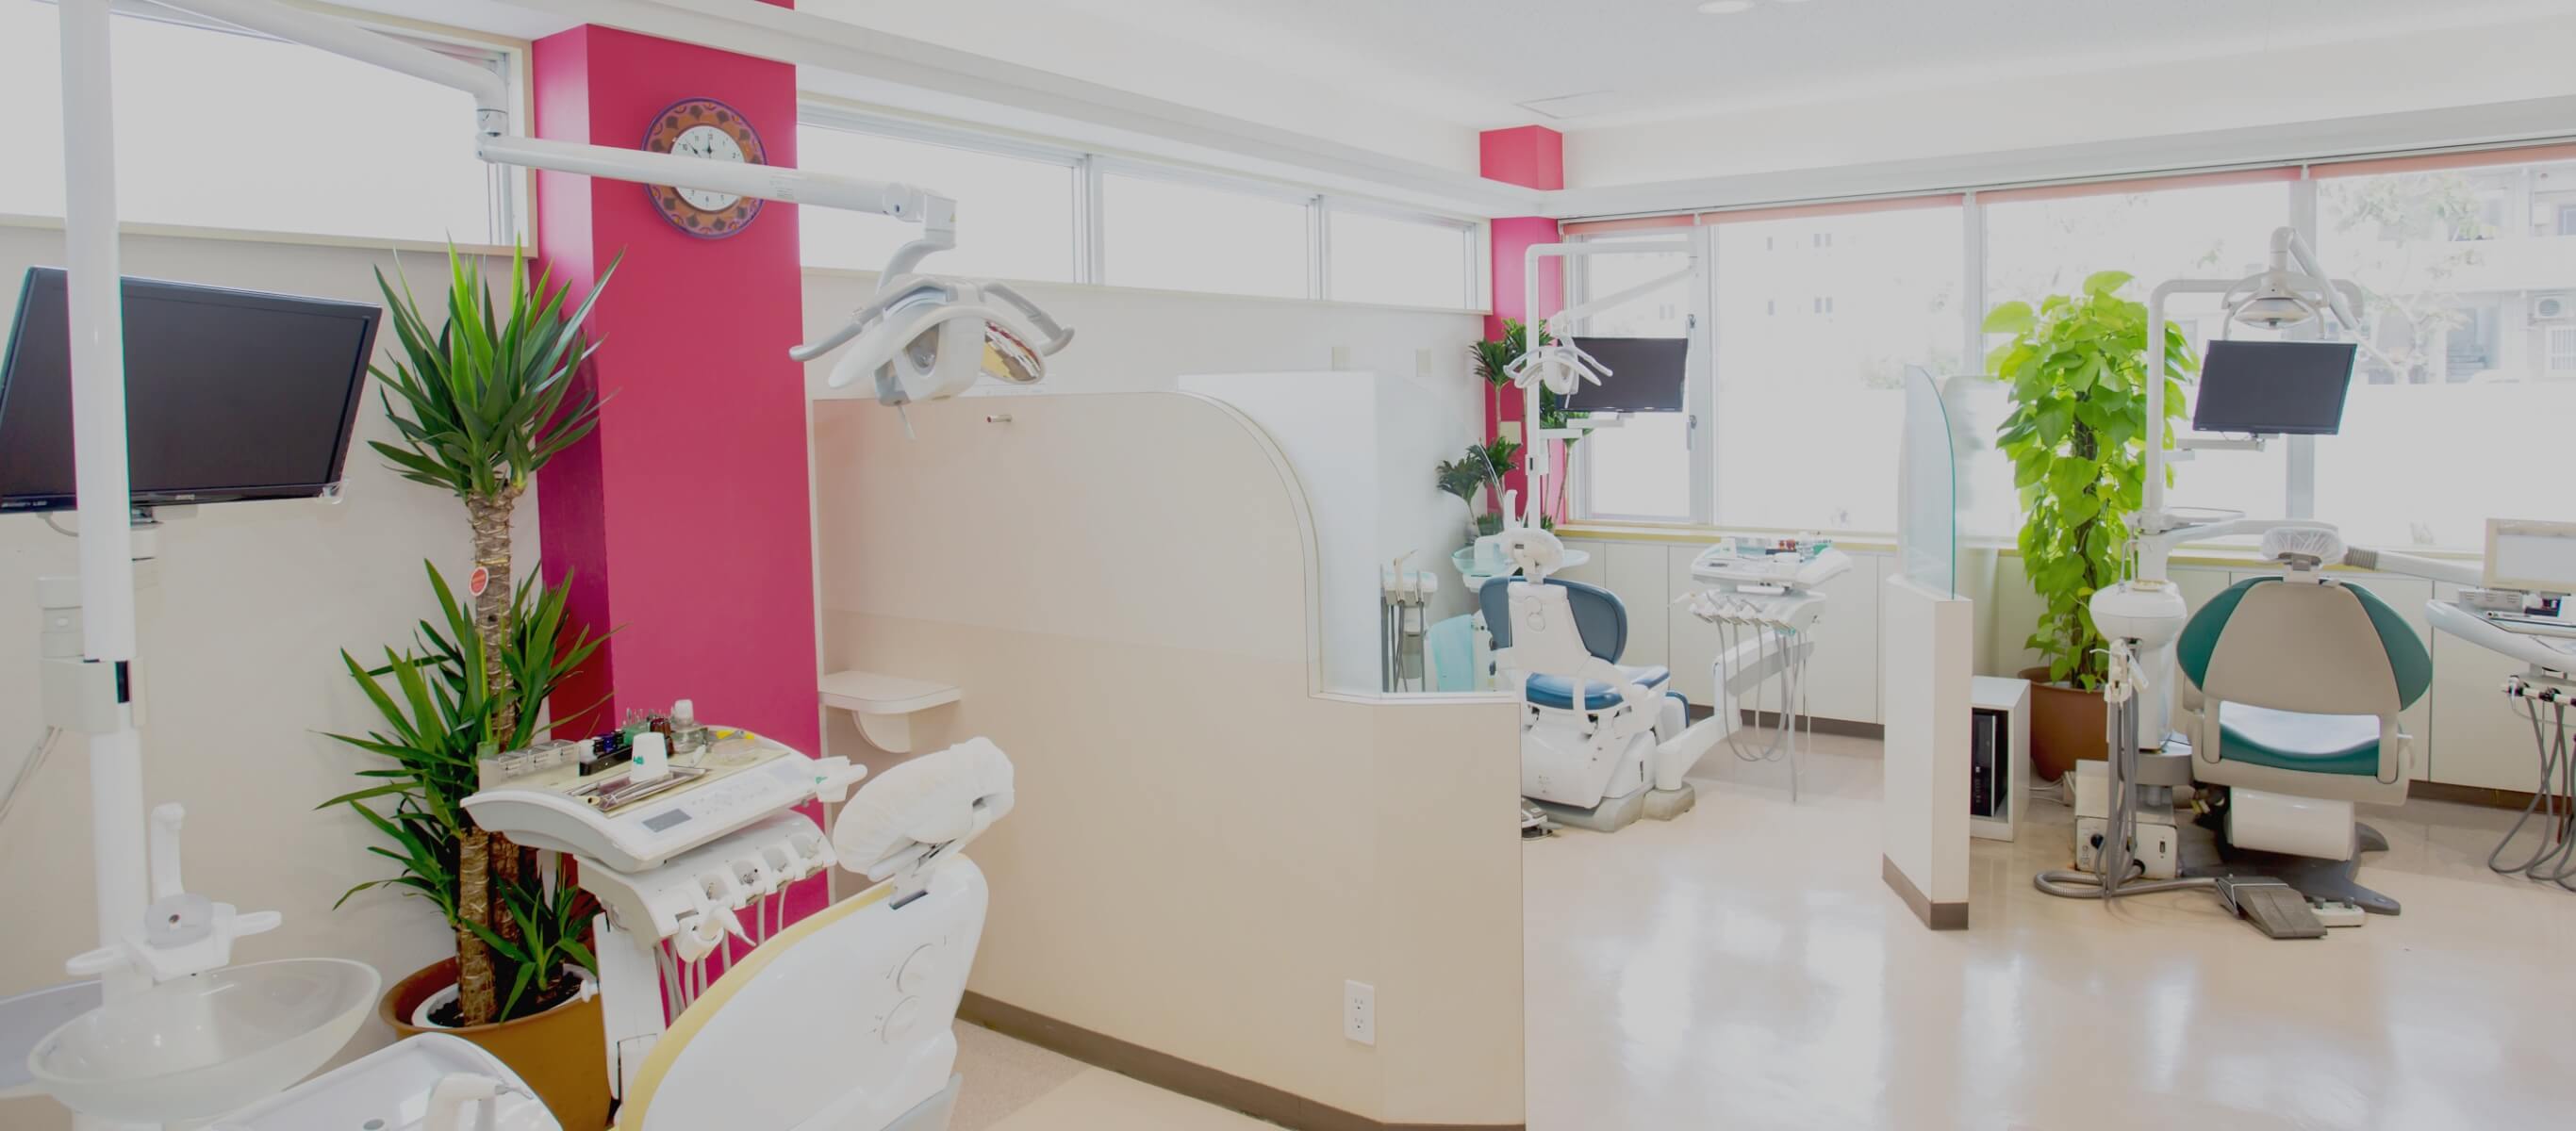 WELCOME TO DENTAL CLINIC 気軽に通える歯のお医者さん